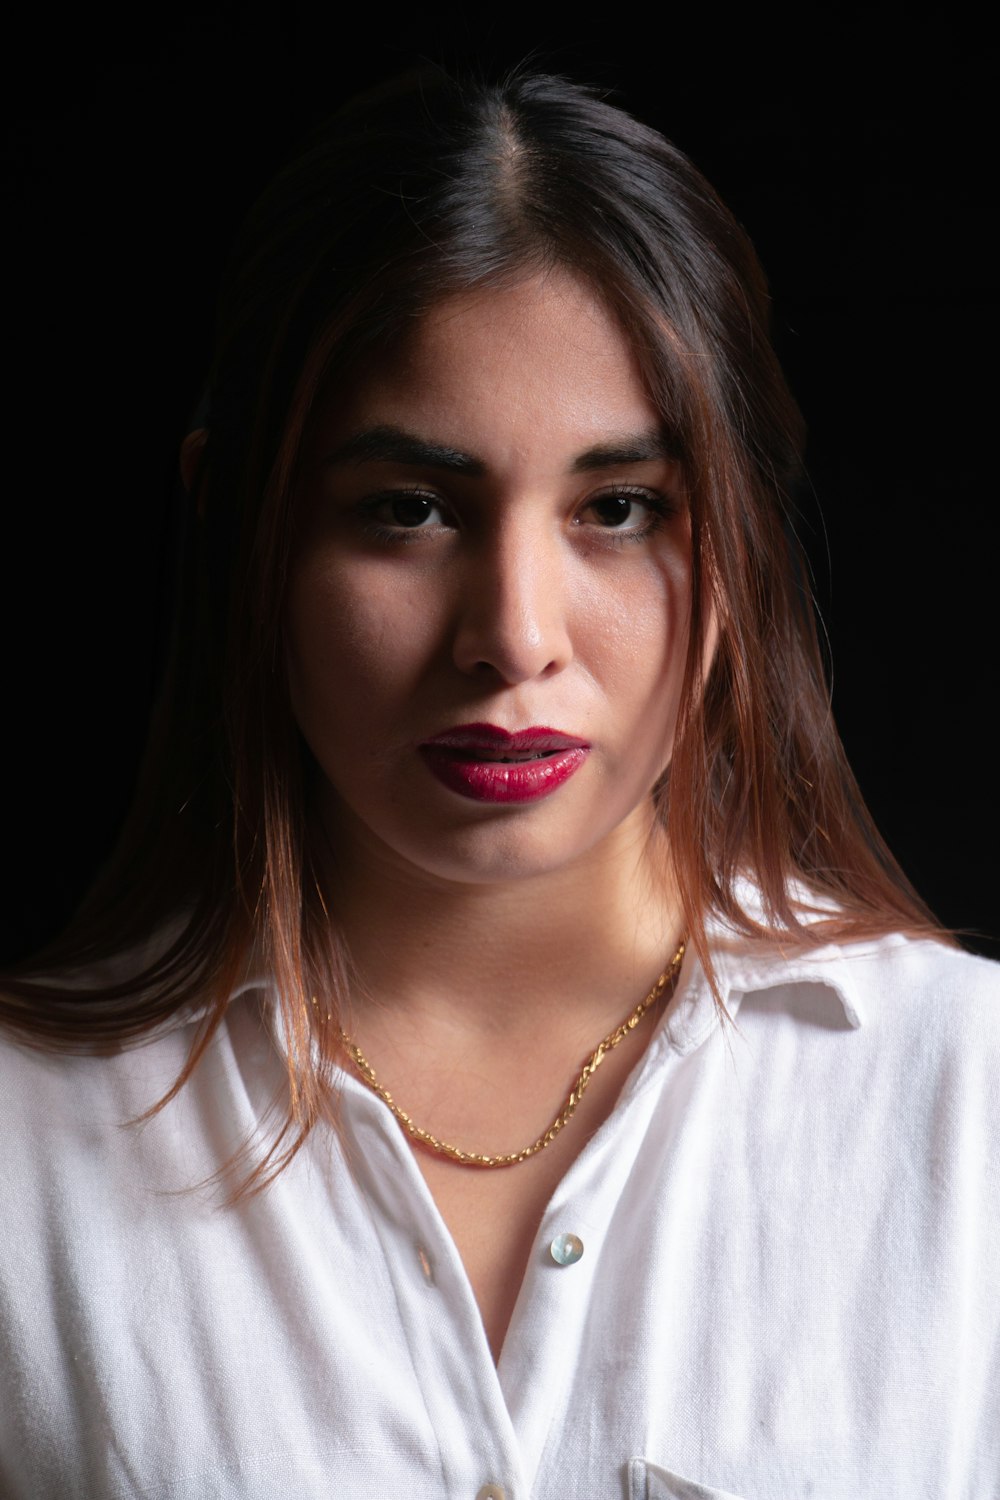 a woman wearing a white shirt and a necklace